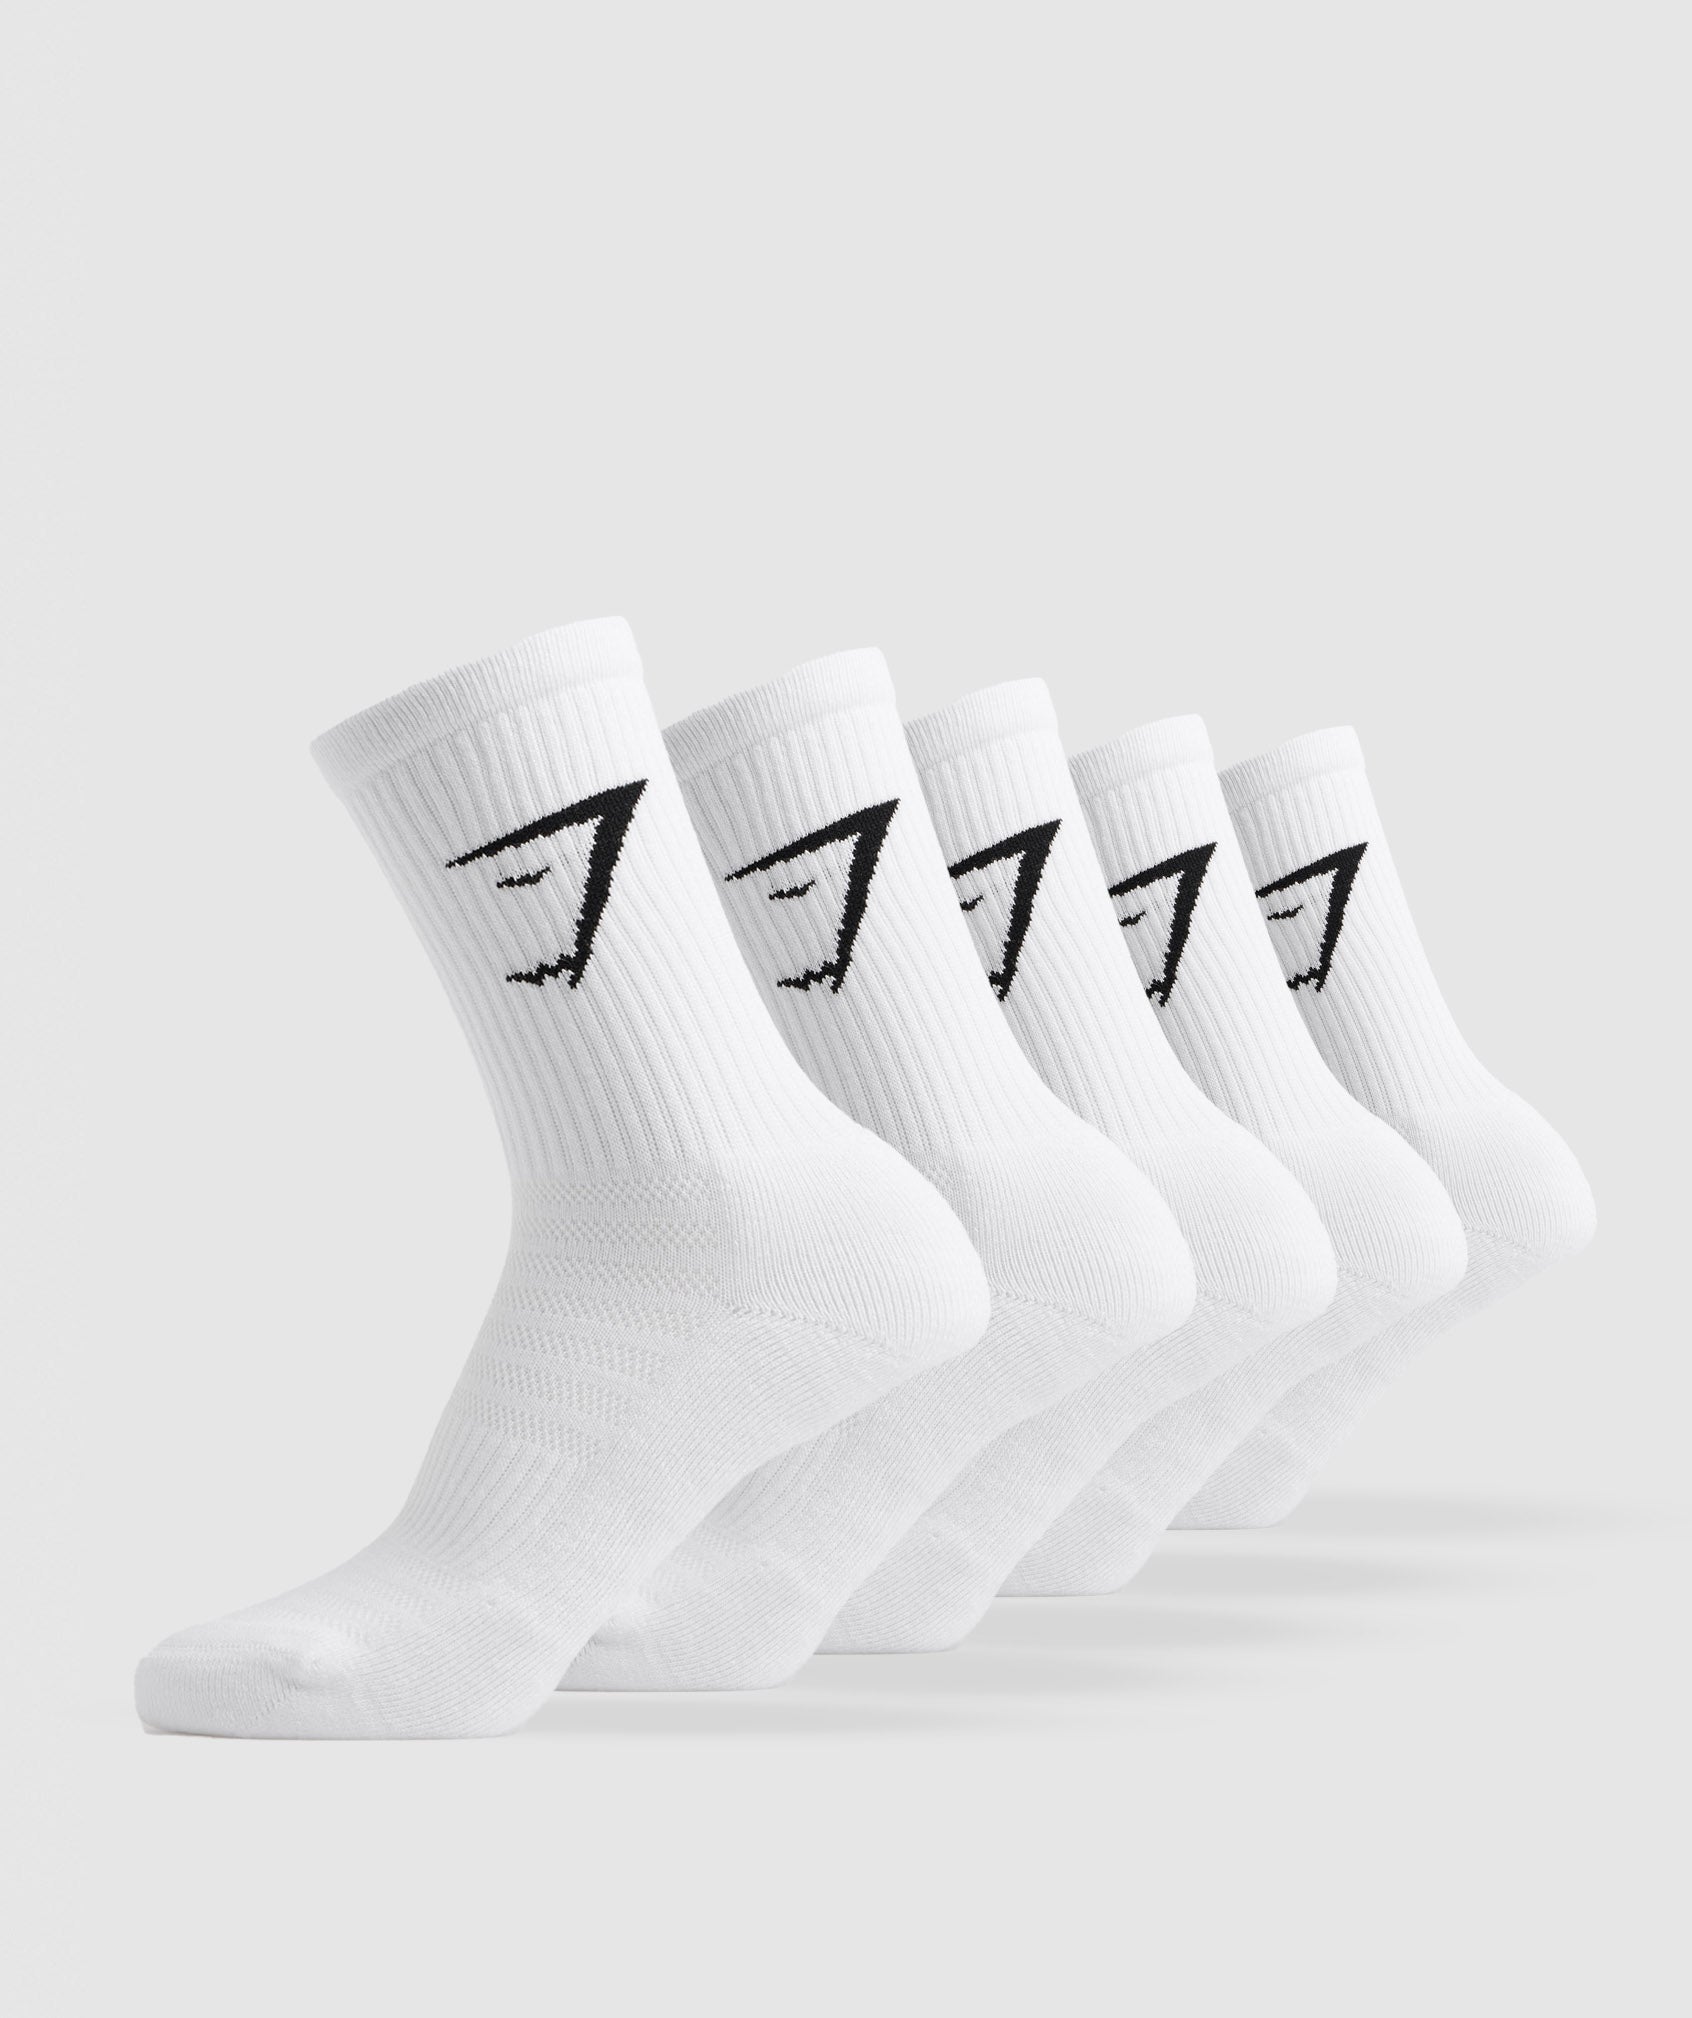 Crew Socks 5pk in White is out of stock